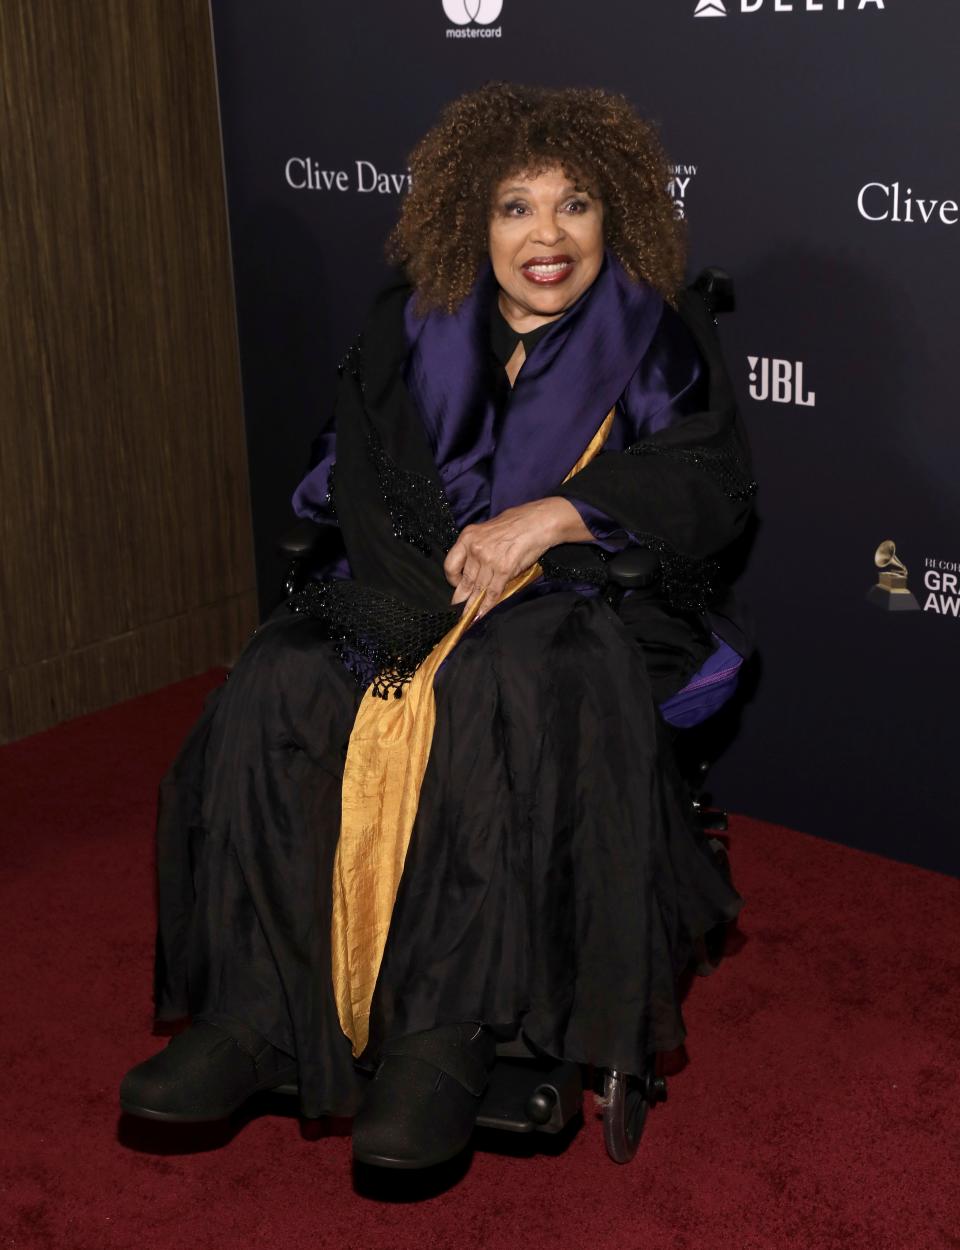 Roberta Flack arrives at the Pre-Grammy Gala And Salute To Industry Icons at the Beverly Hilton Hotel on Saturday, Jan. 25, 2020, in Beverly Hills, Calif. A representative for Roberta Flack has announced that the legendary singer has ALS, commonly known as Lou Gehrig’s disease.